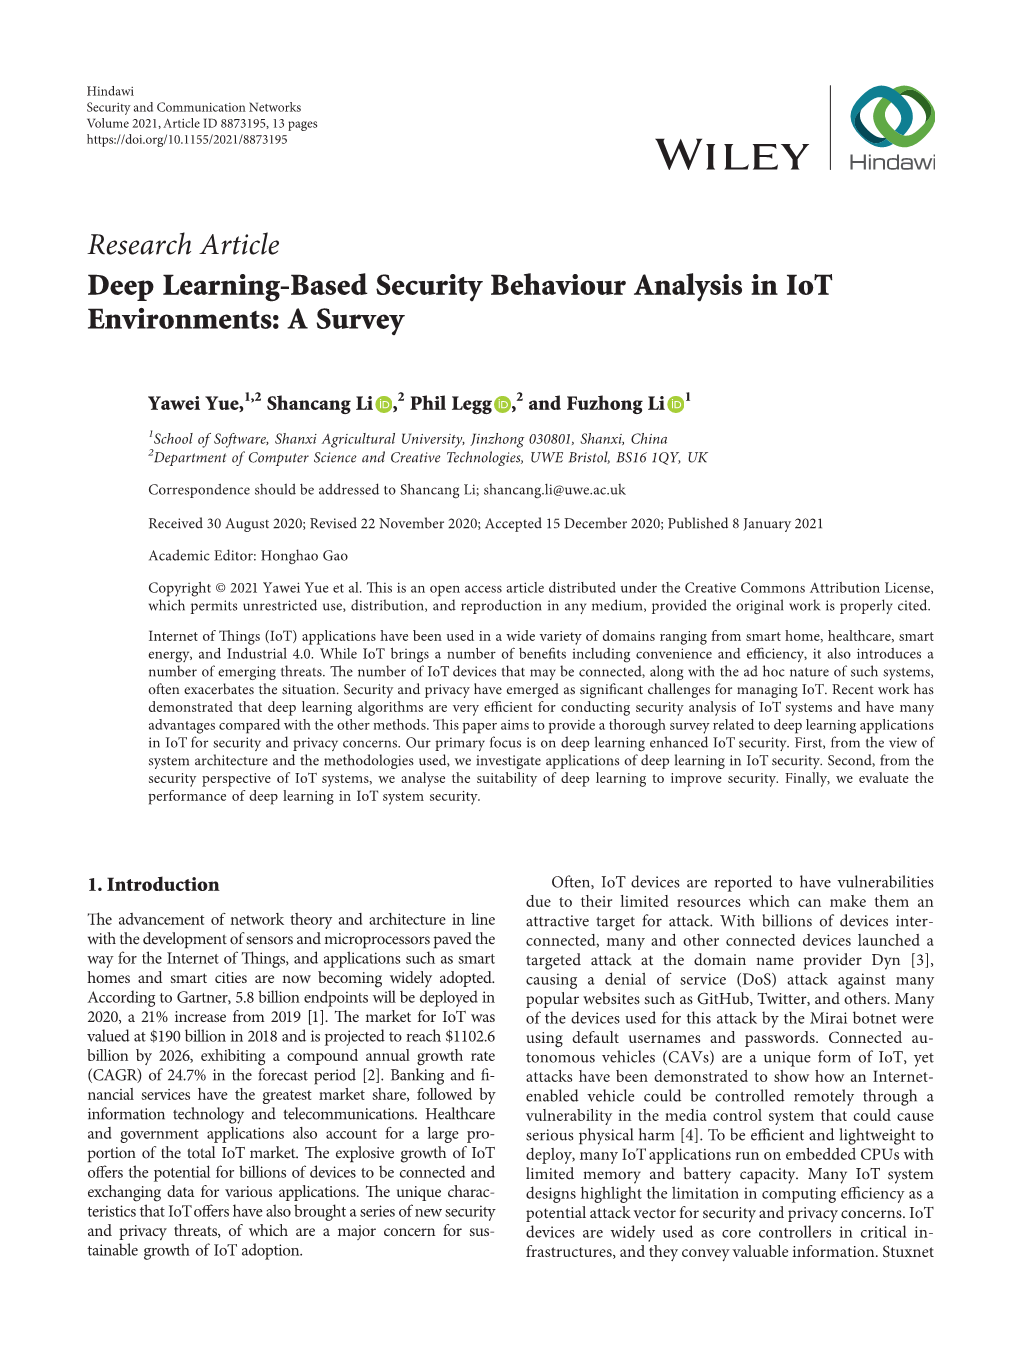 Deep Learning-Based Security Behaviour Analysis in Iot Environments: a Survey